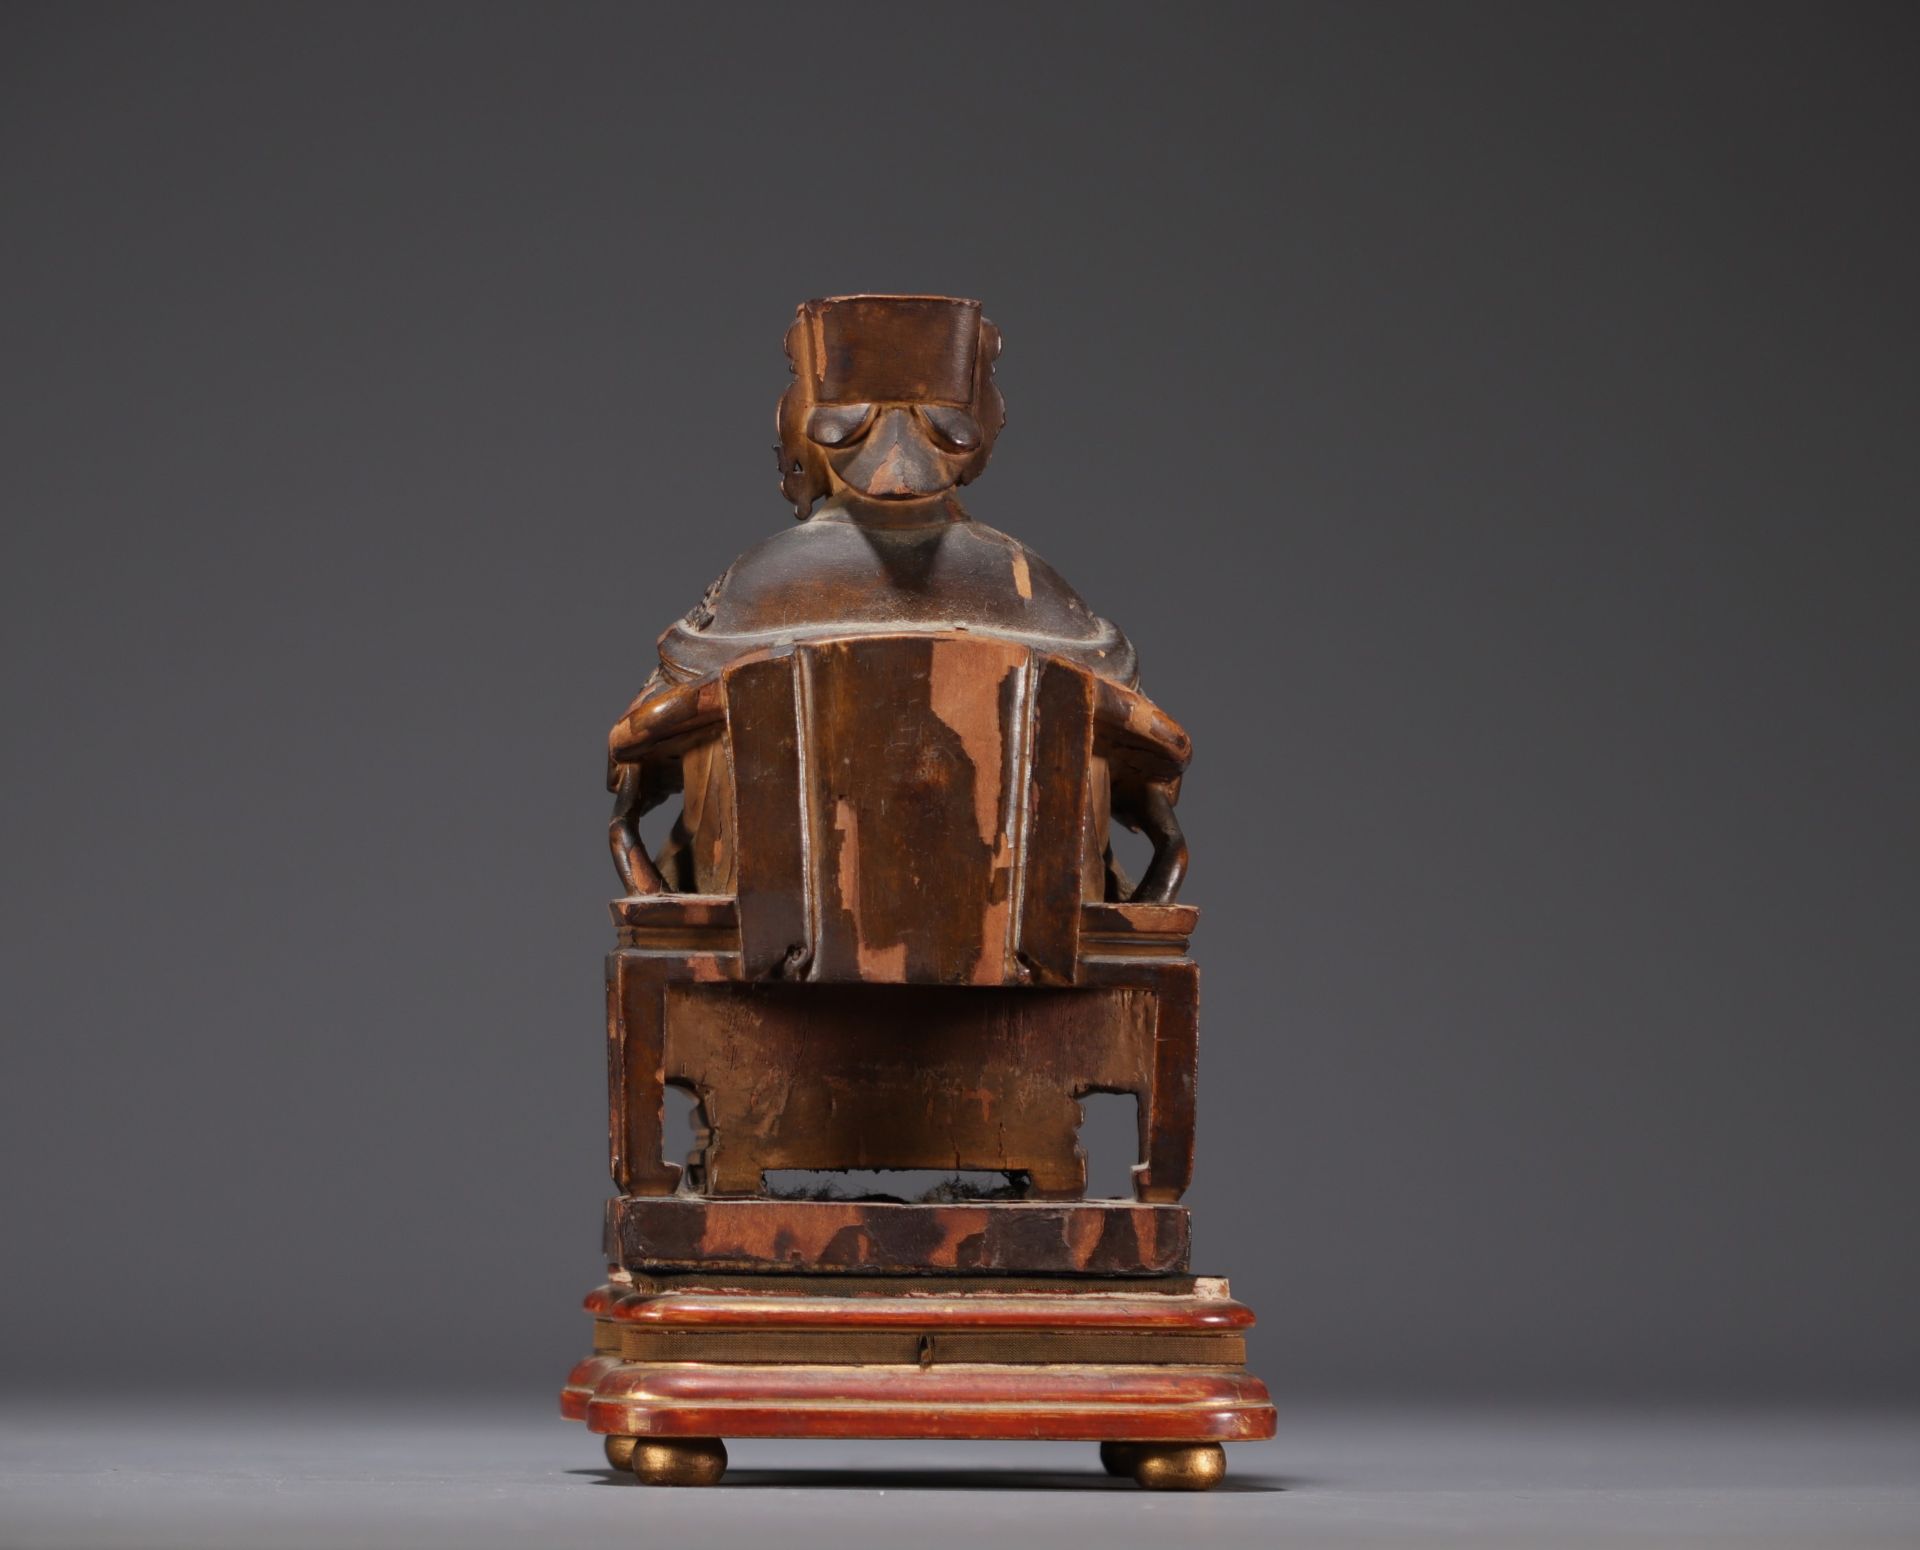 China - Statuette of a Dignitary in carved wood, Ming period. - Image 3 of 4